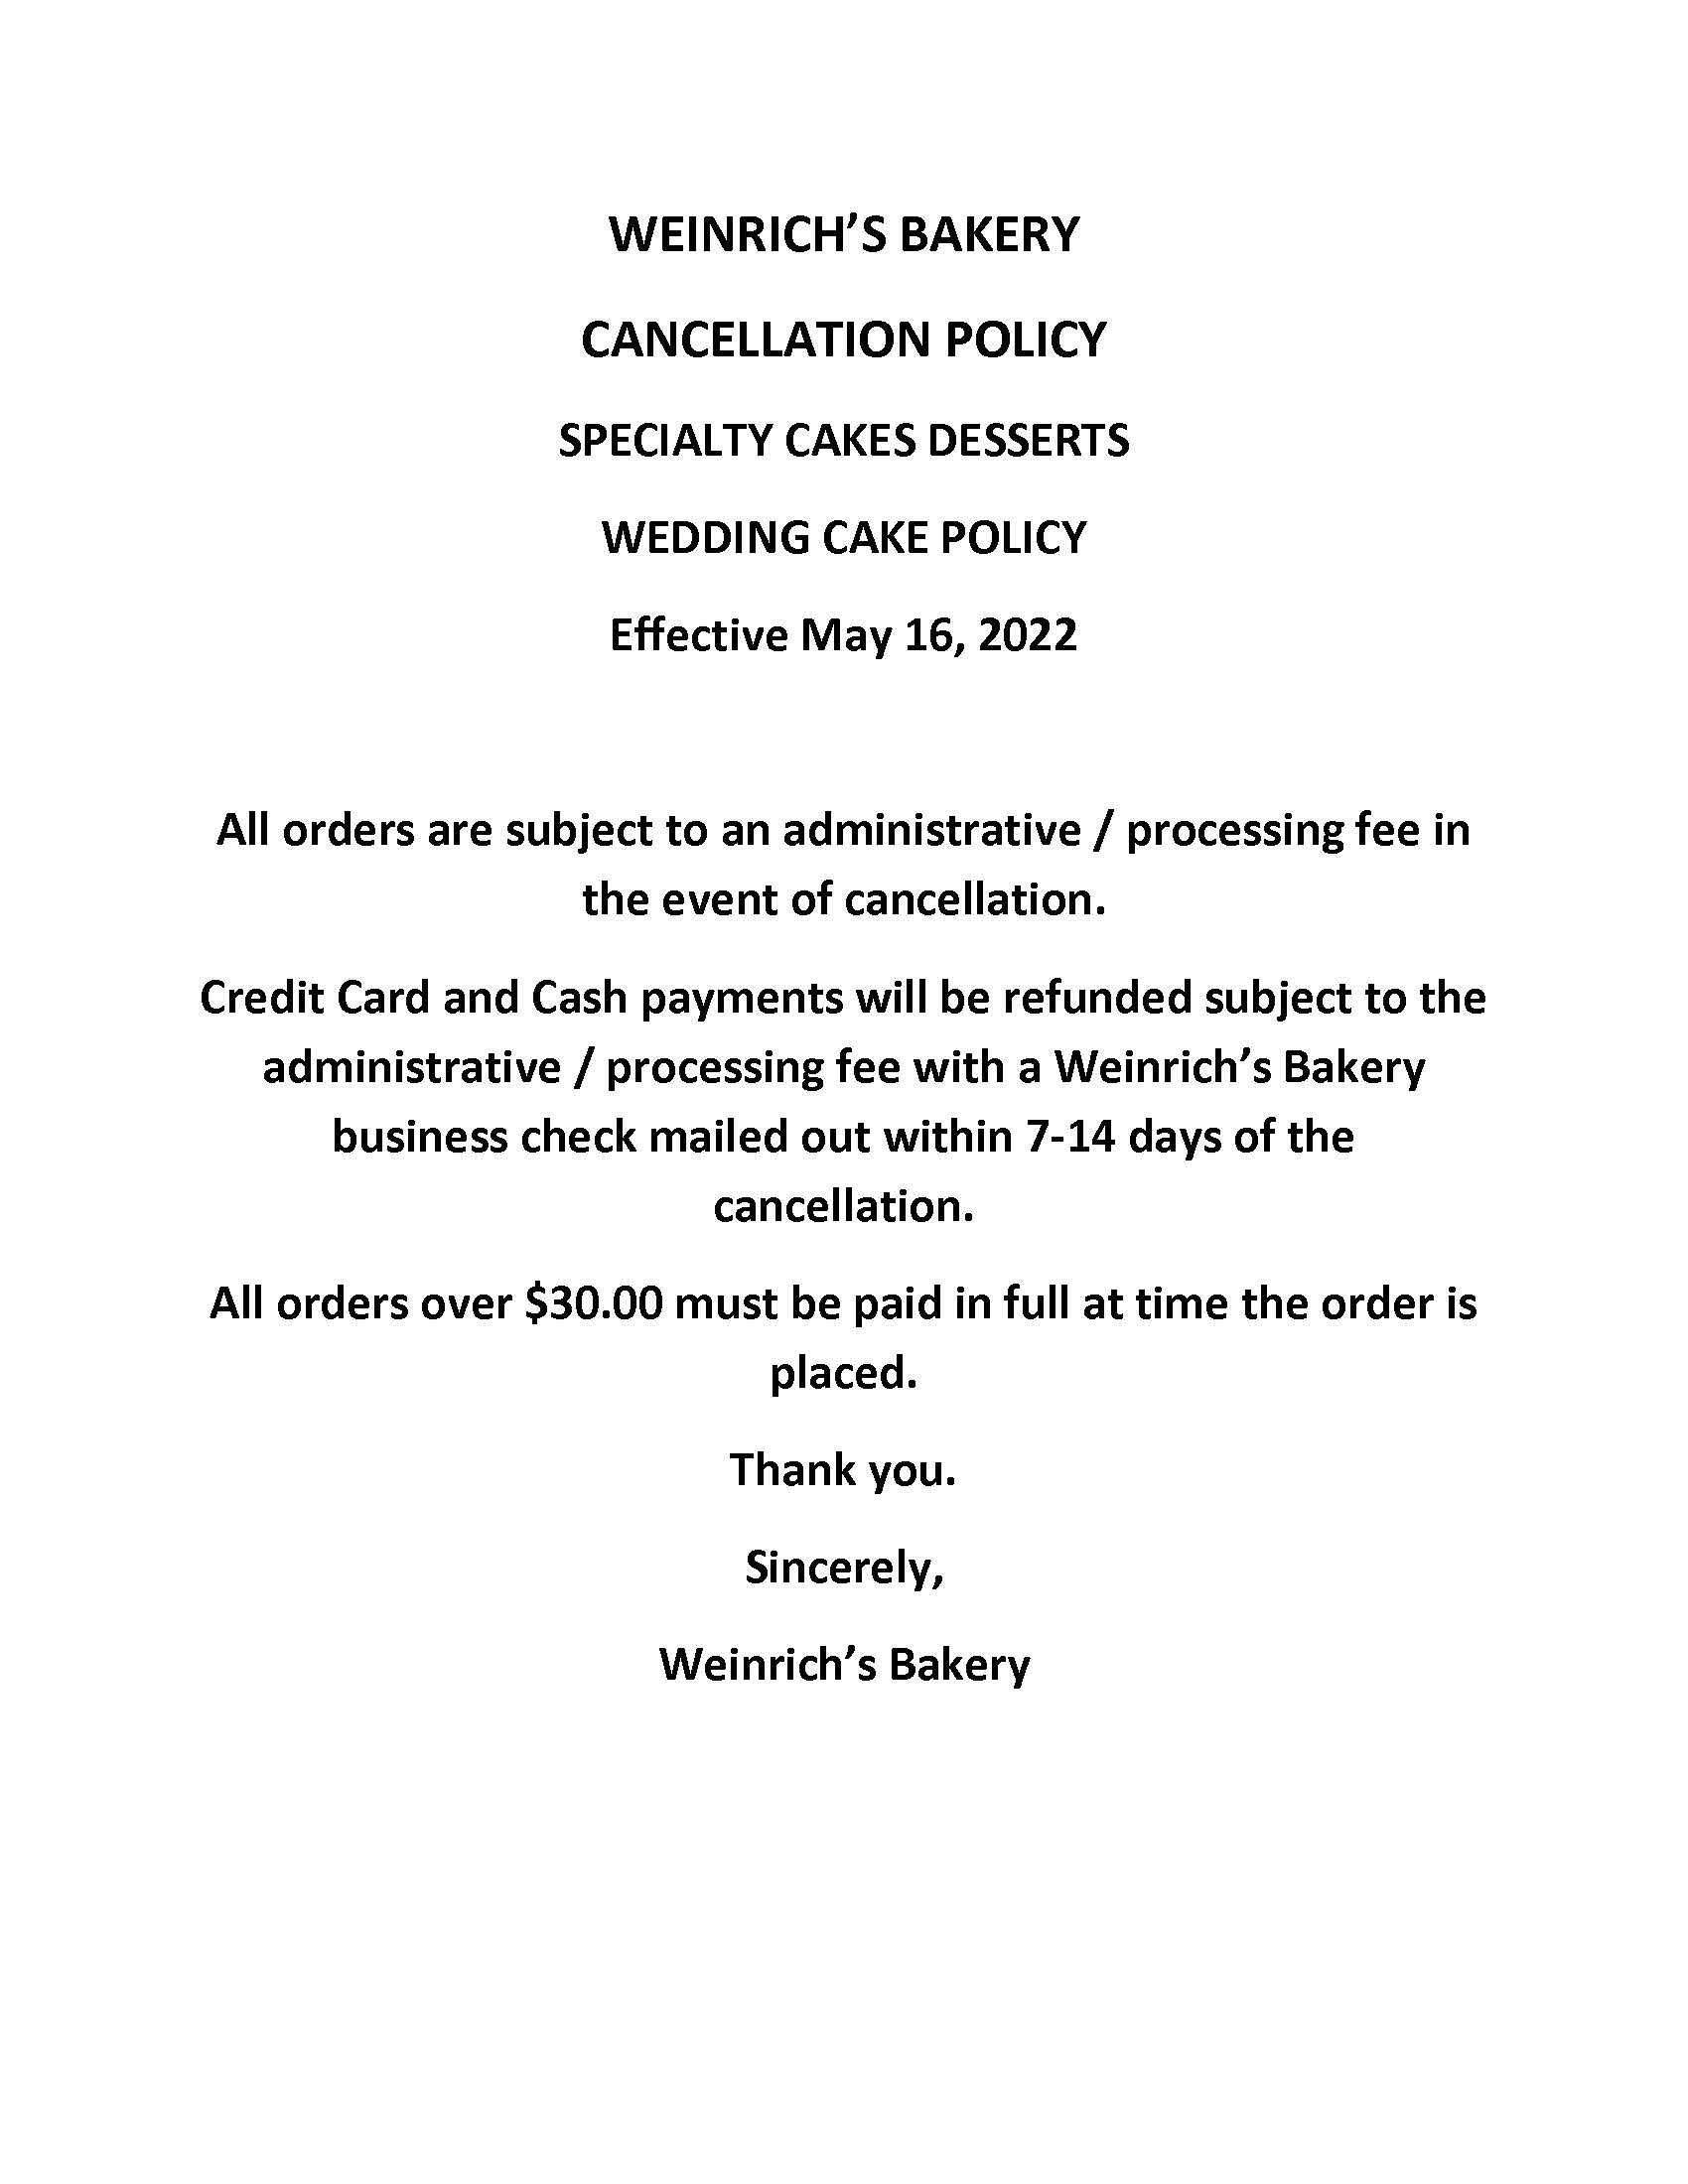 Wendy's bakery cancellation policy.